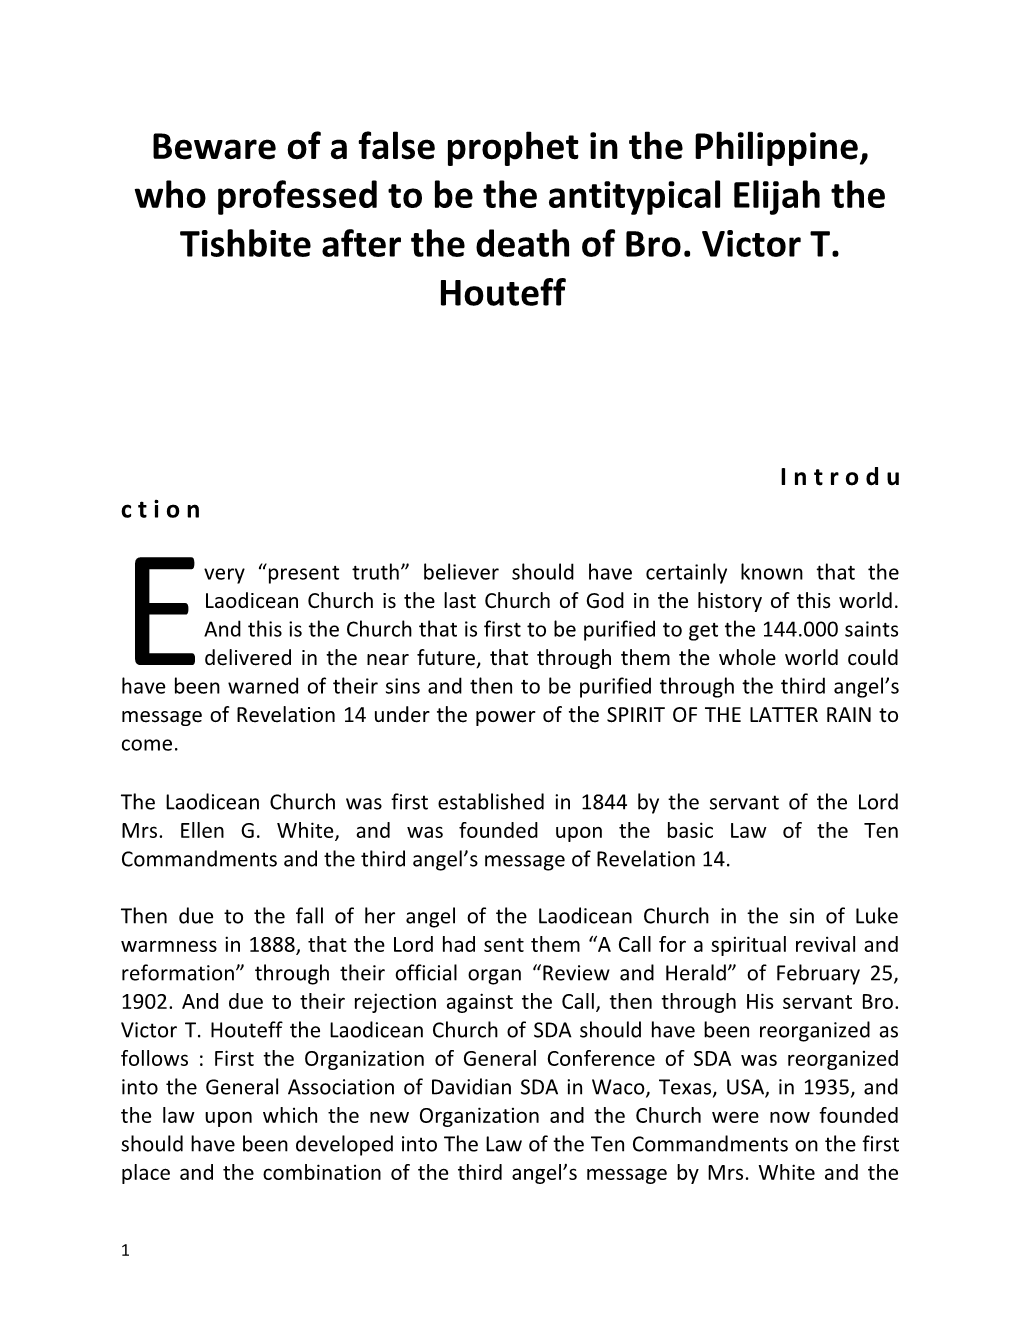 Beware of a False Prophet in the Philippine, Who Professed to Be the Antitypical Elijah